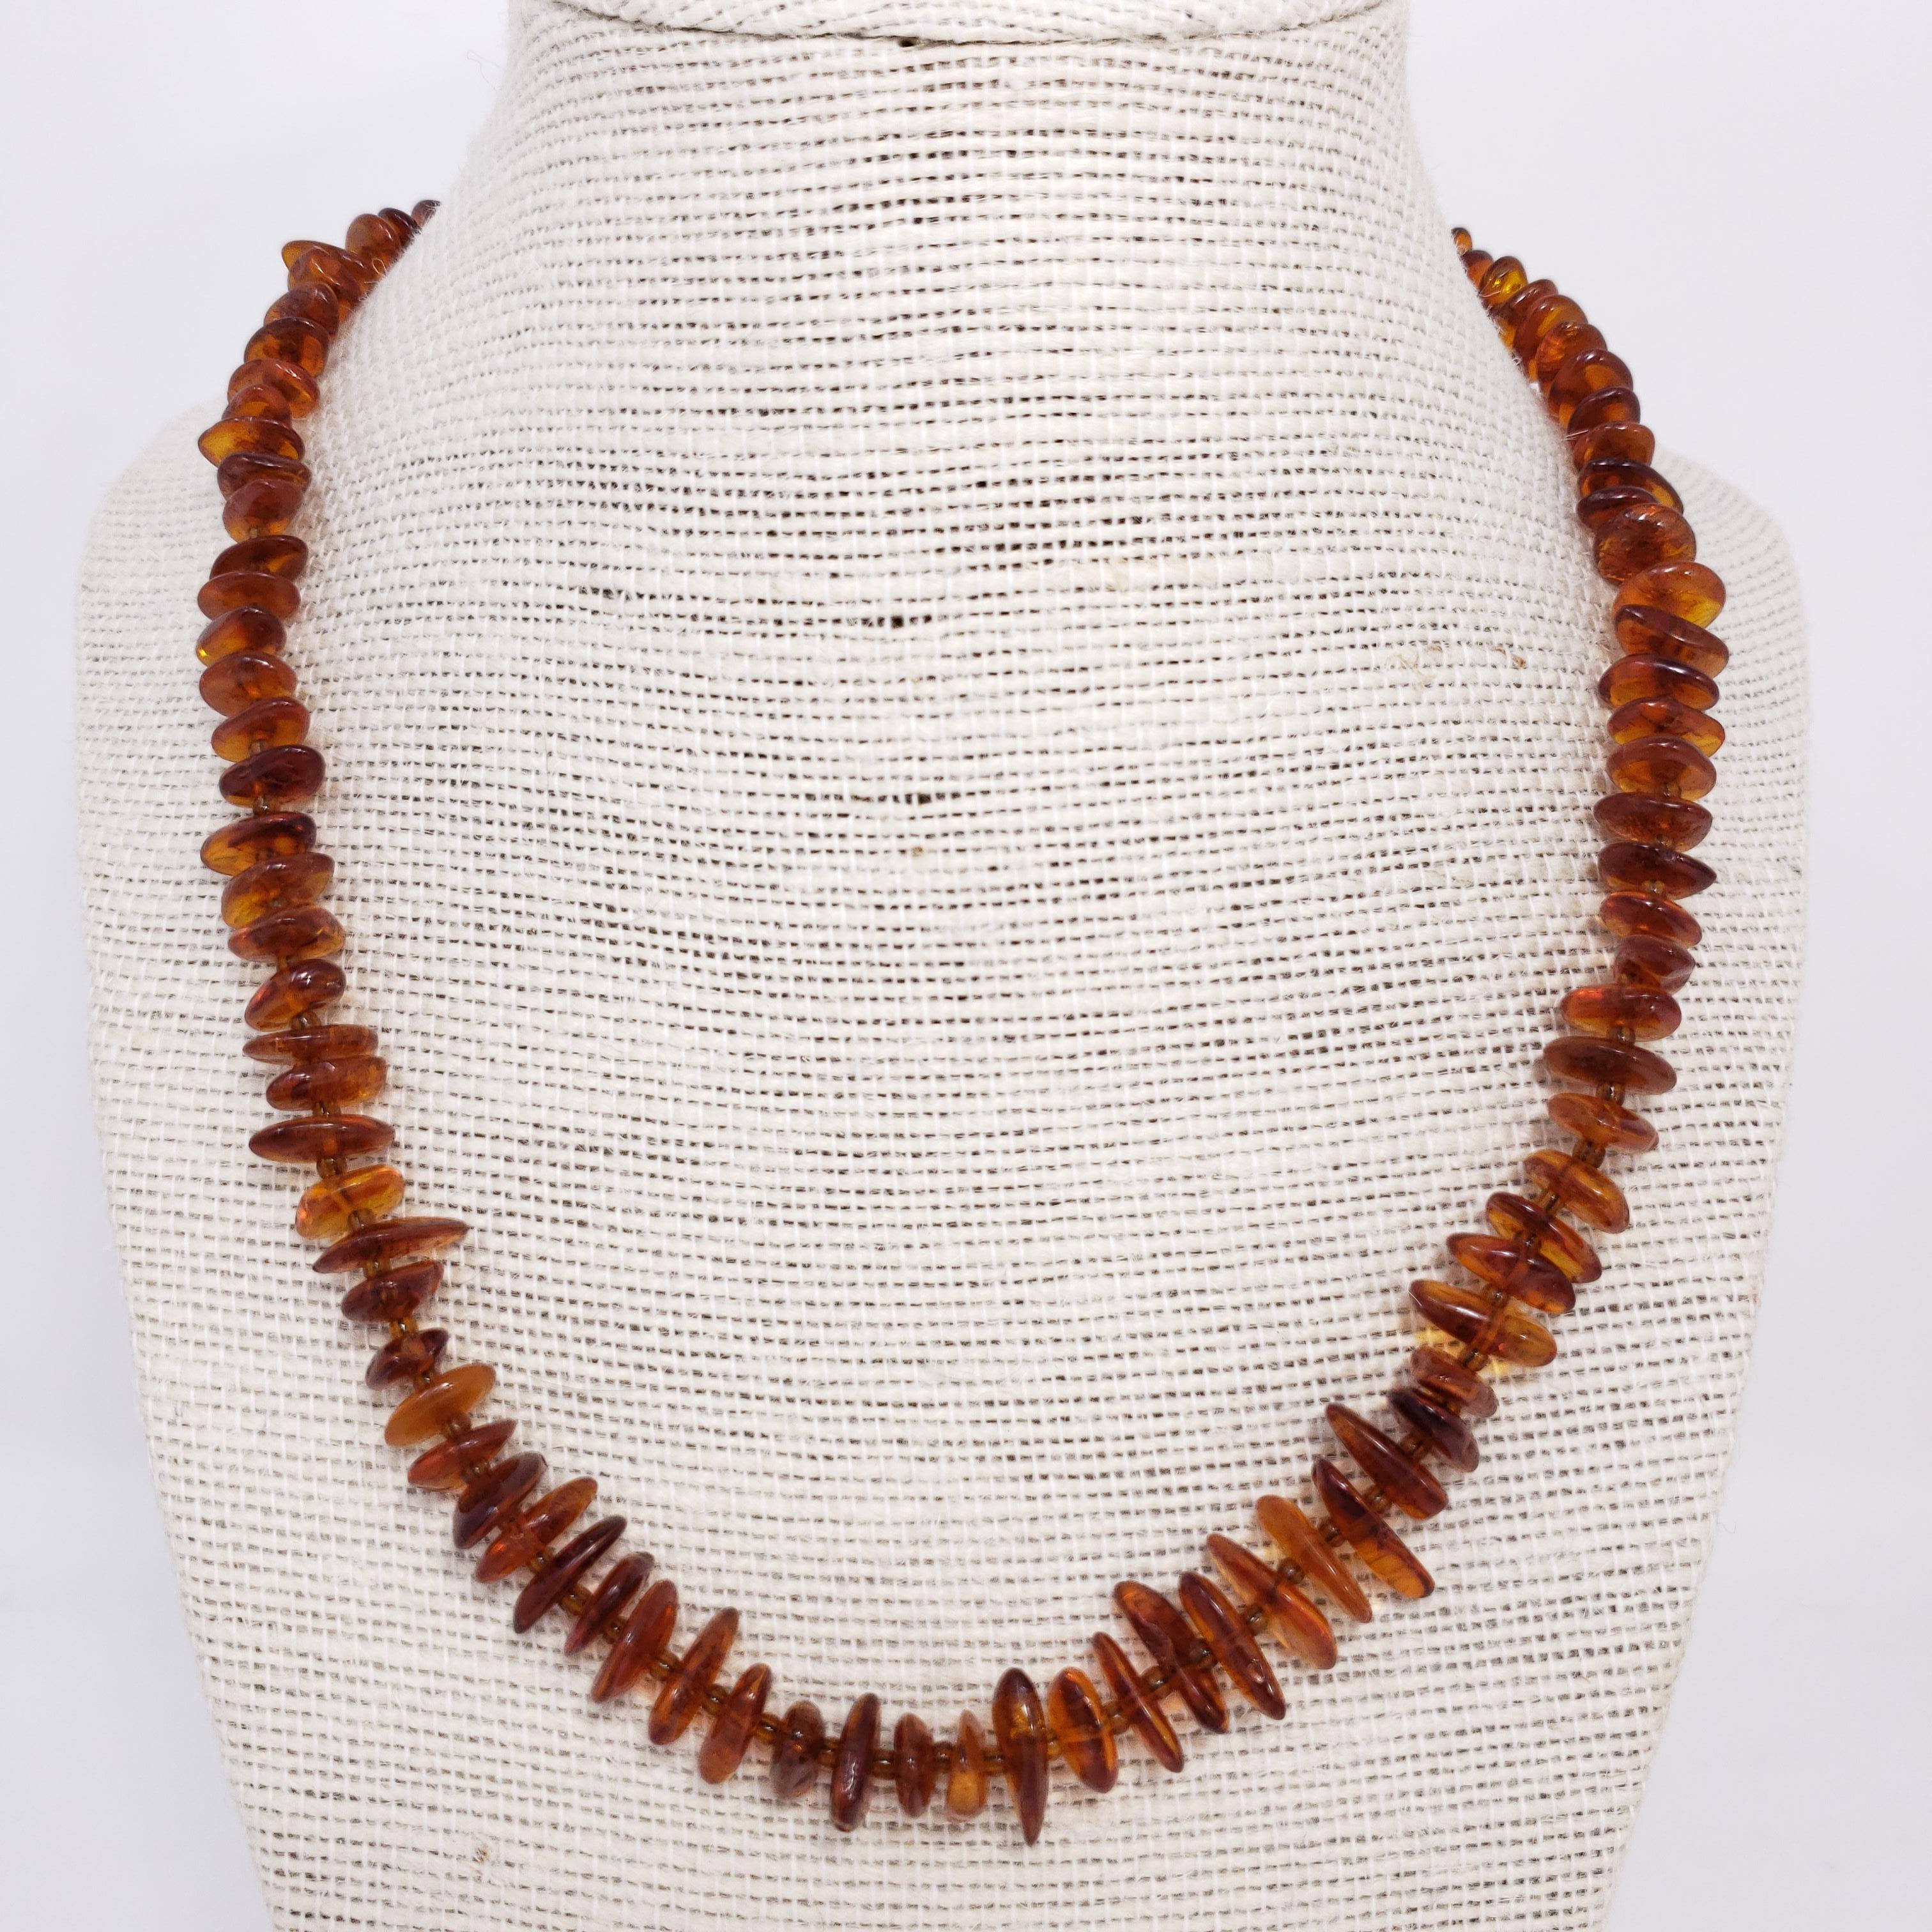 Exquisite Russian necklace, featuring flat Baltic amber beads in a gorgeous dark orange tone, with smaller alternating spacer beads.

Circa mid 20th century.
